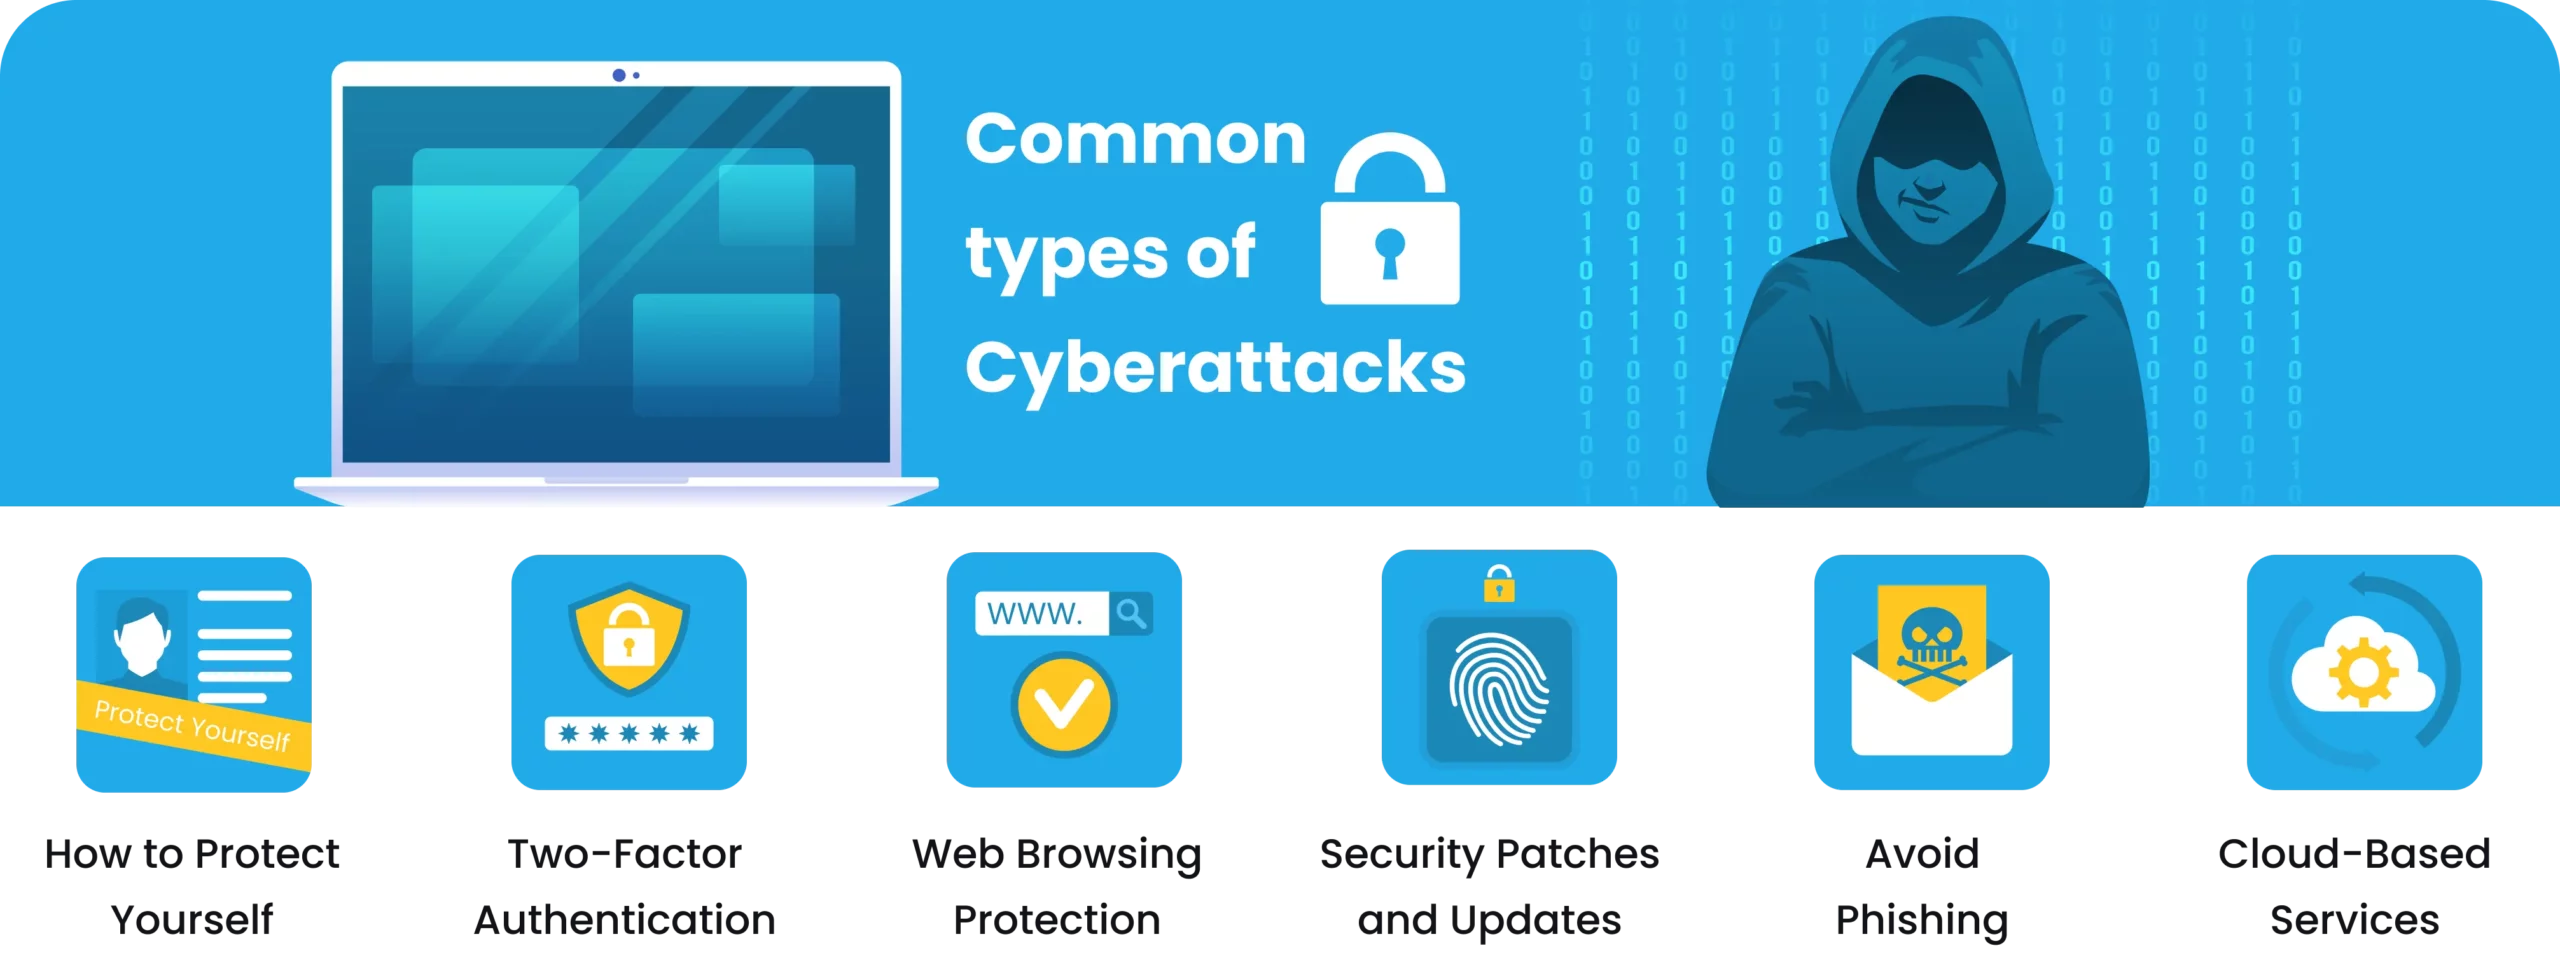 Common types of cyberattacks